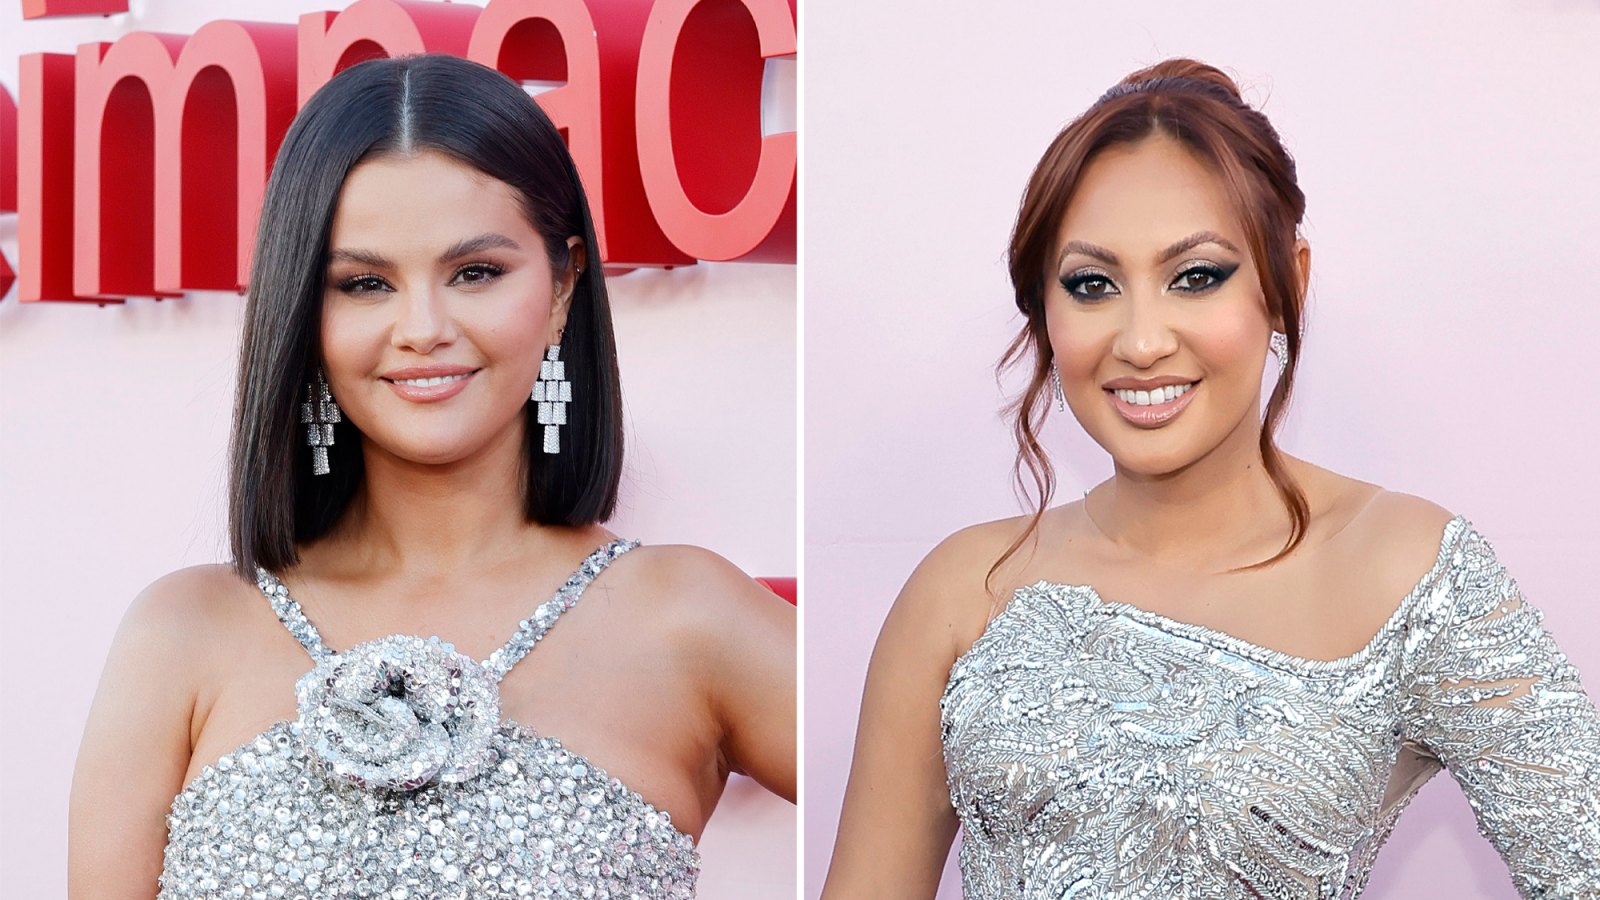 Francia Raisa and Selena Gomez Poke Fun at Their Alleged Beef While Teasing New Project